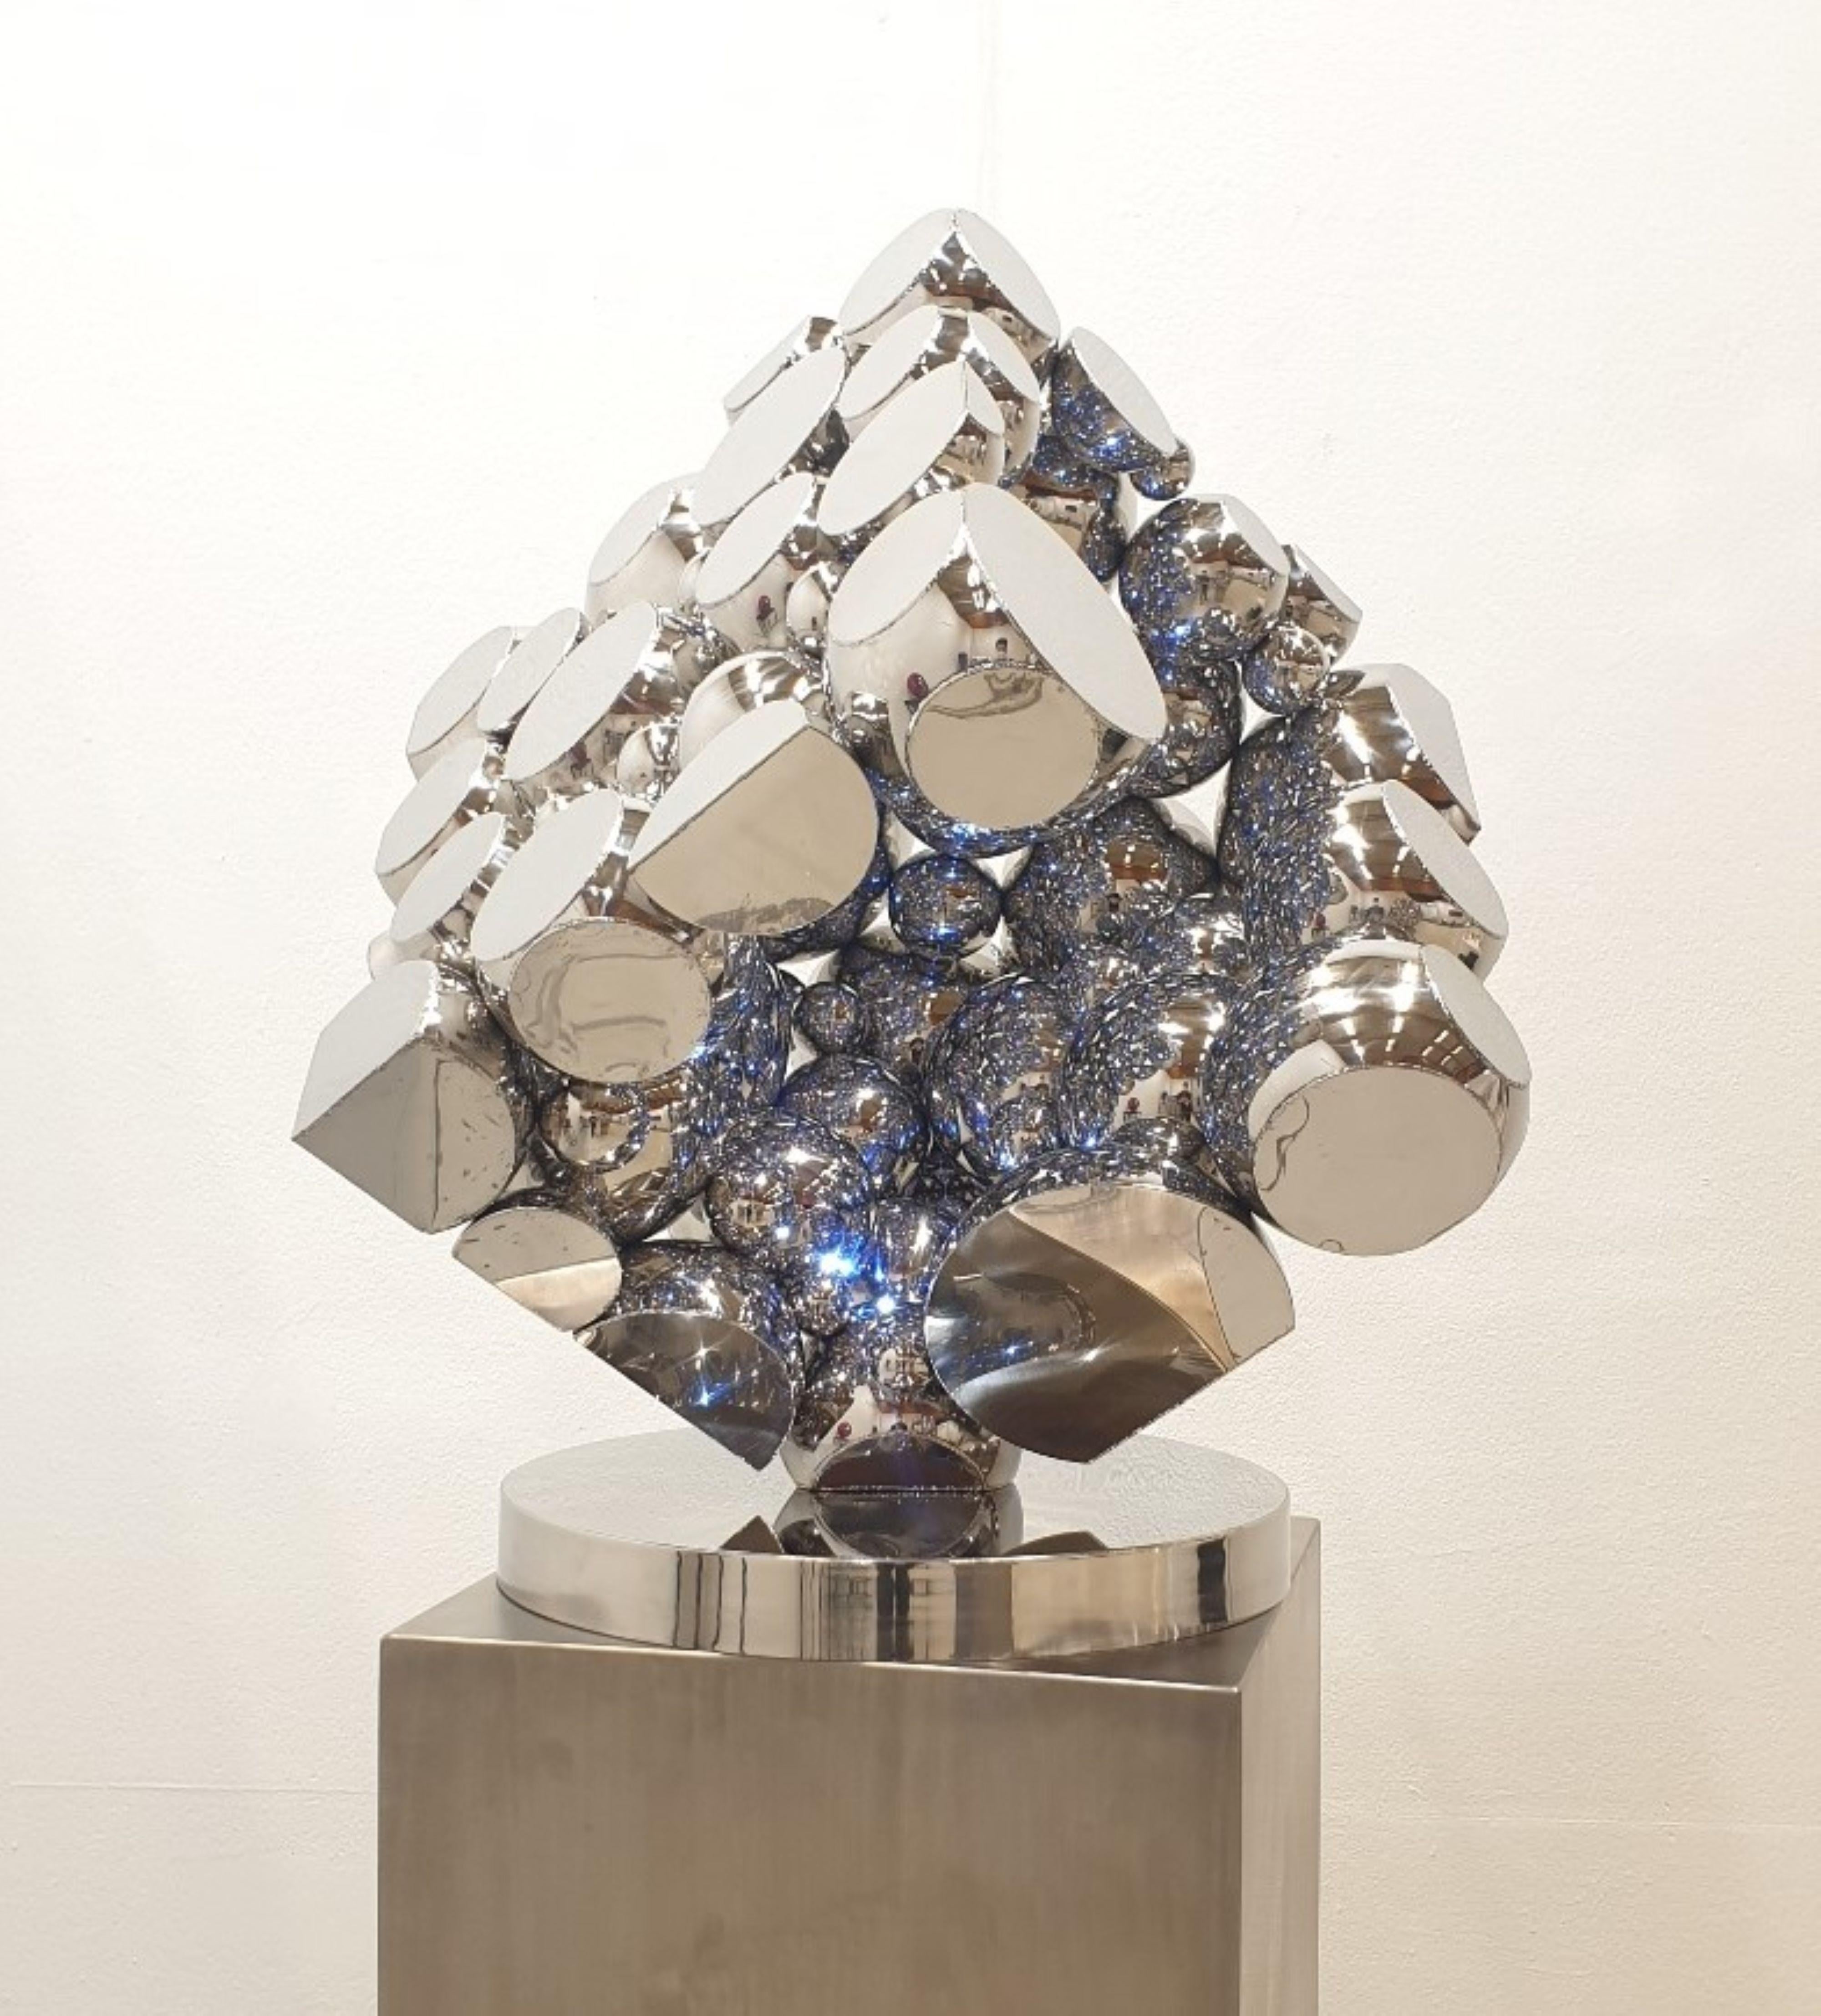 Artist Lee Song Joon (1982) has been recognized for his unique and fascinating sculptures that have pushed boundaries within his field. The artist’s main focus is to expresses ambiguity between the boundaries of reality and virtuality through the